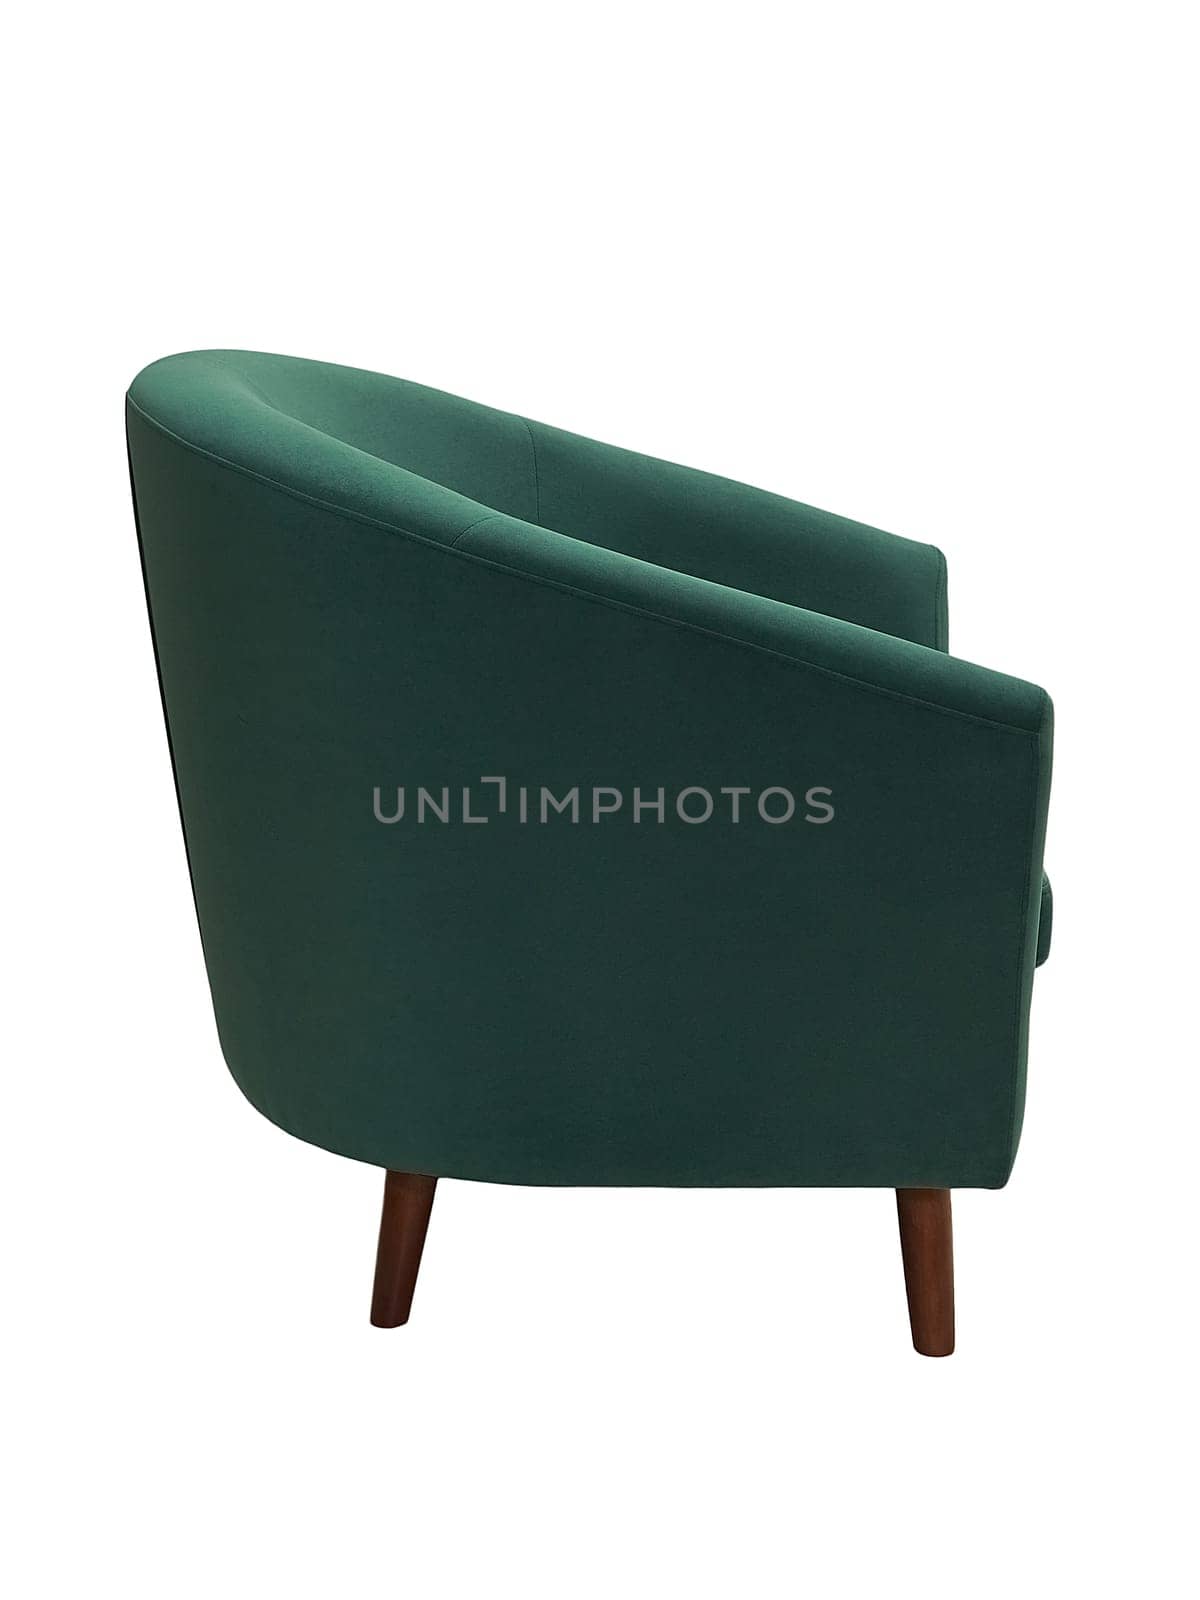 modern green fabric armchair with wooden legs isolated on white background, side view.